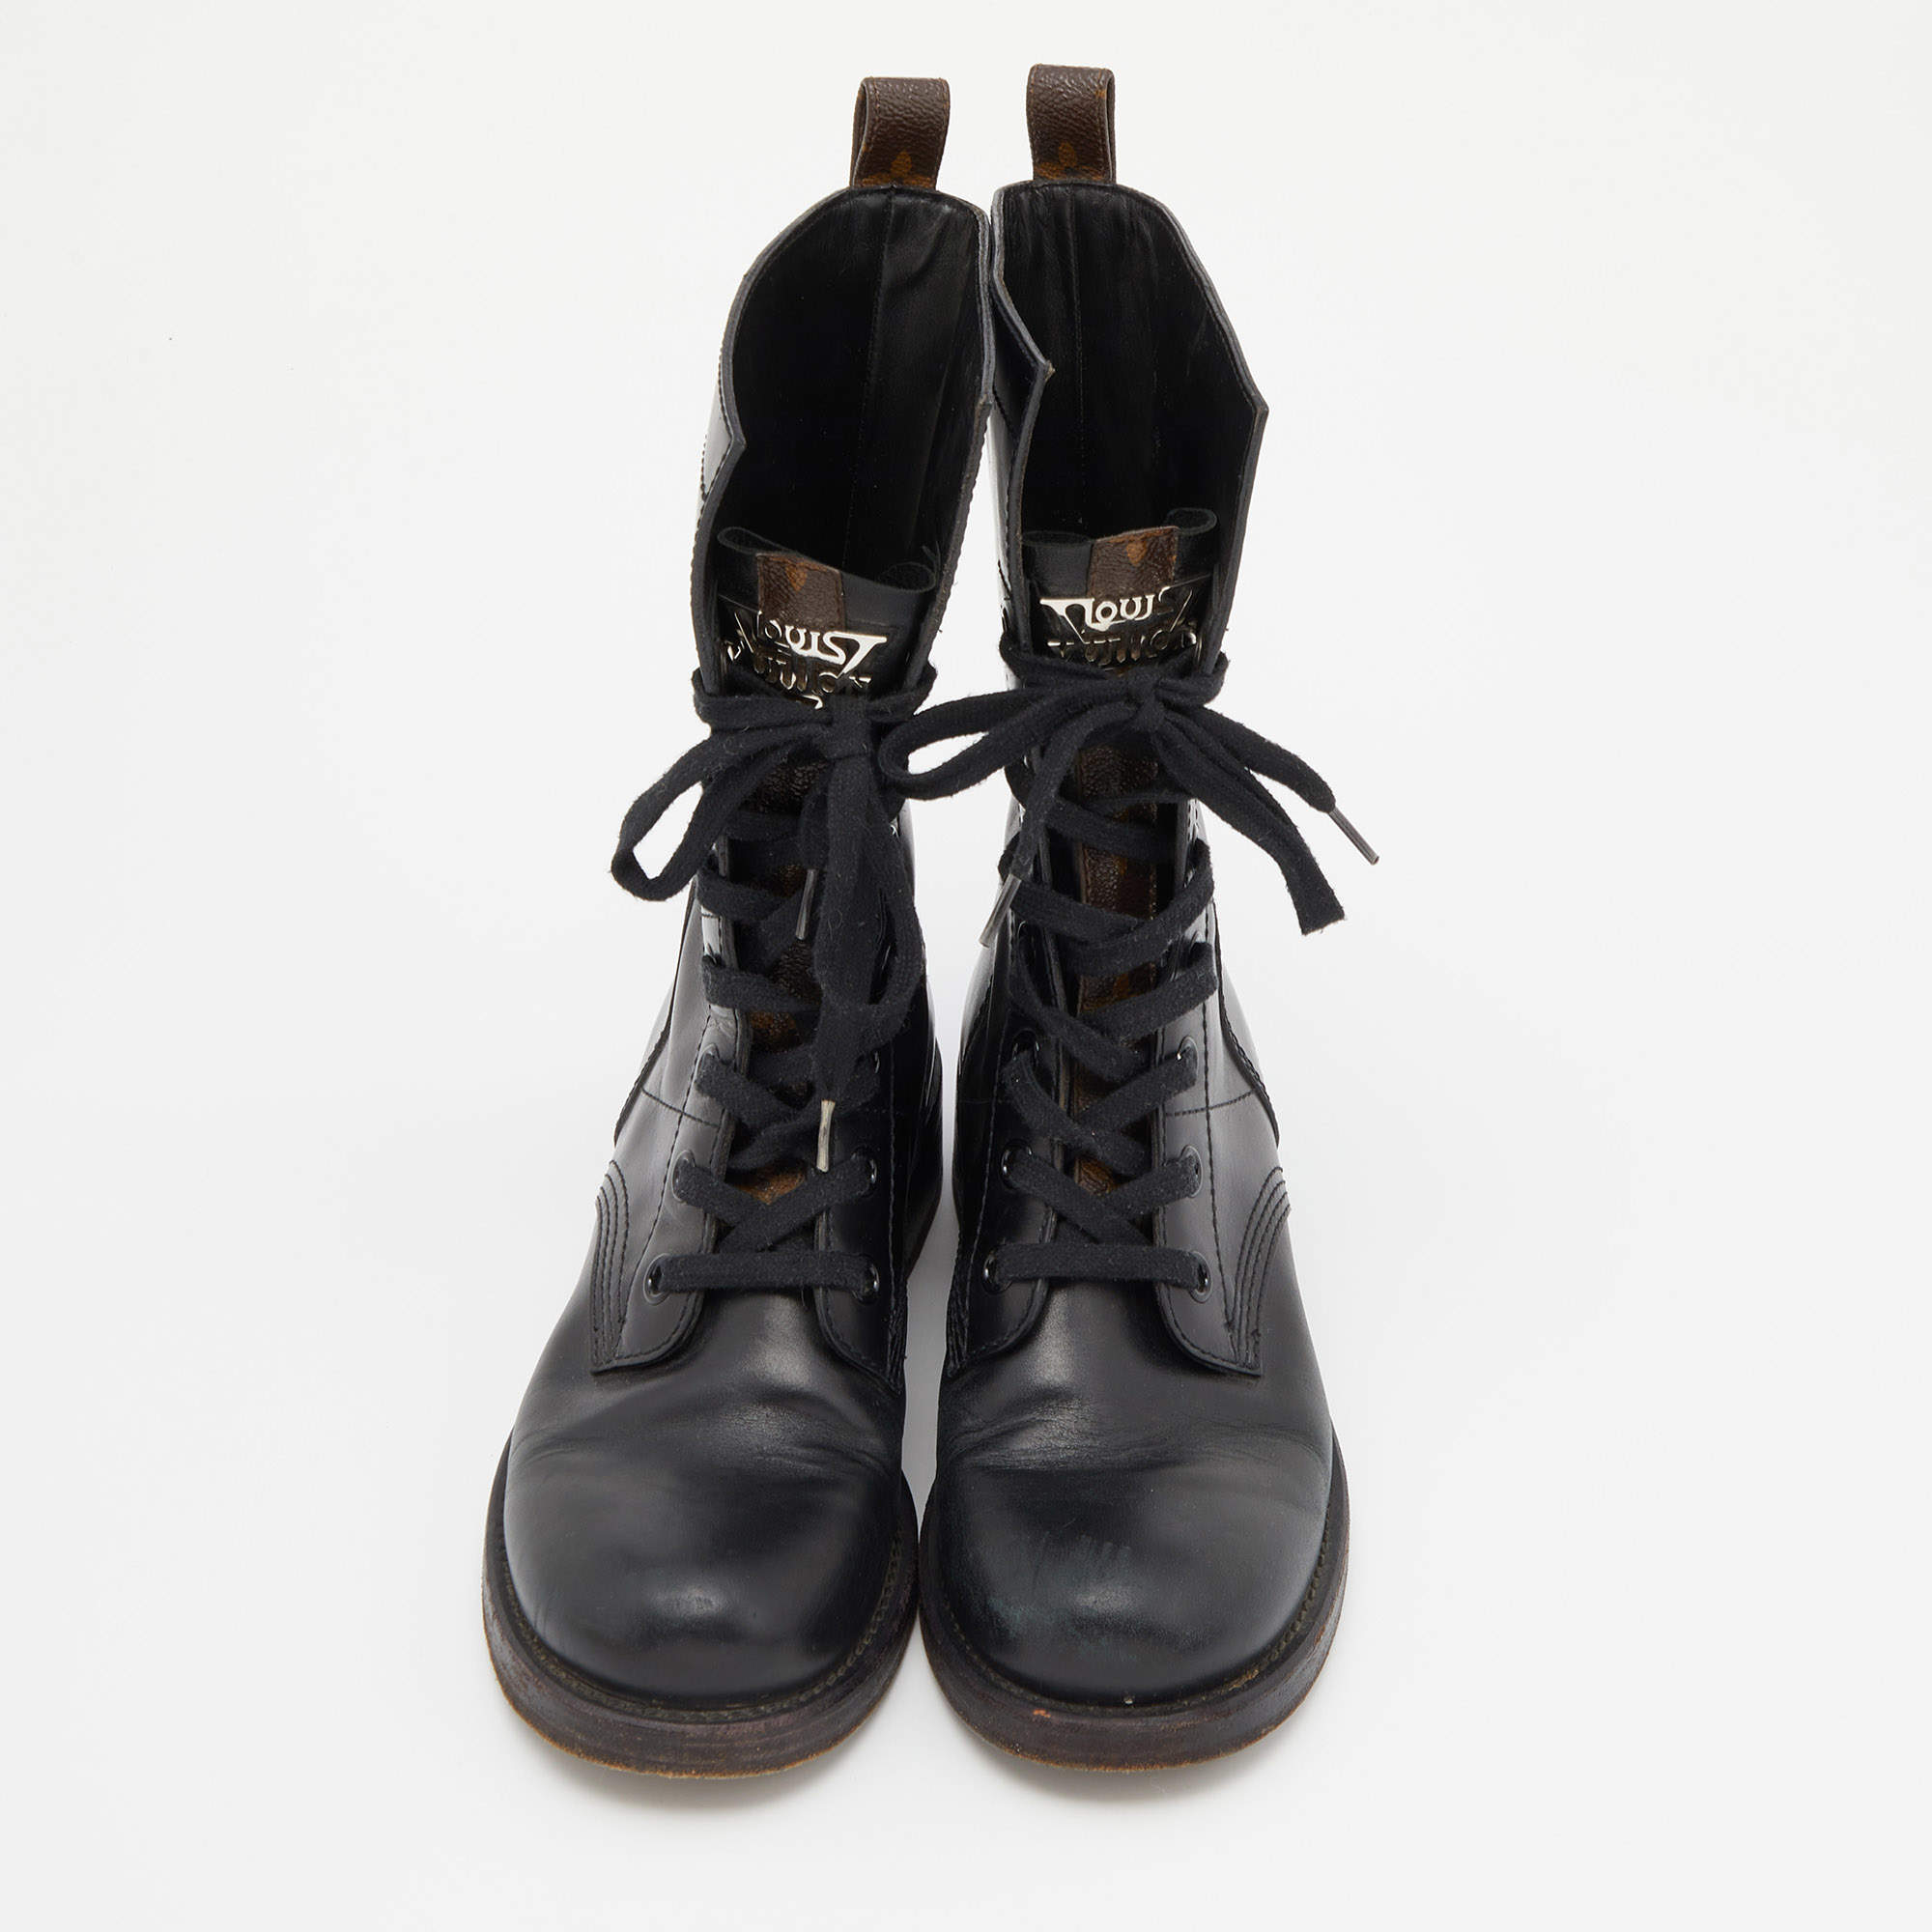 Louis Vuitton Black Leather and Monogram Canvas Lace Up Ankle Boots Size 38